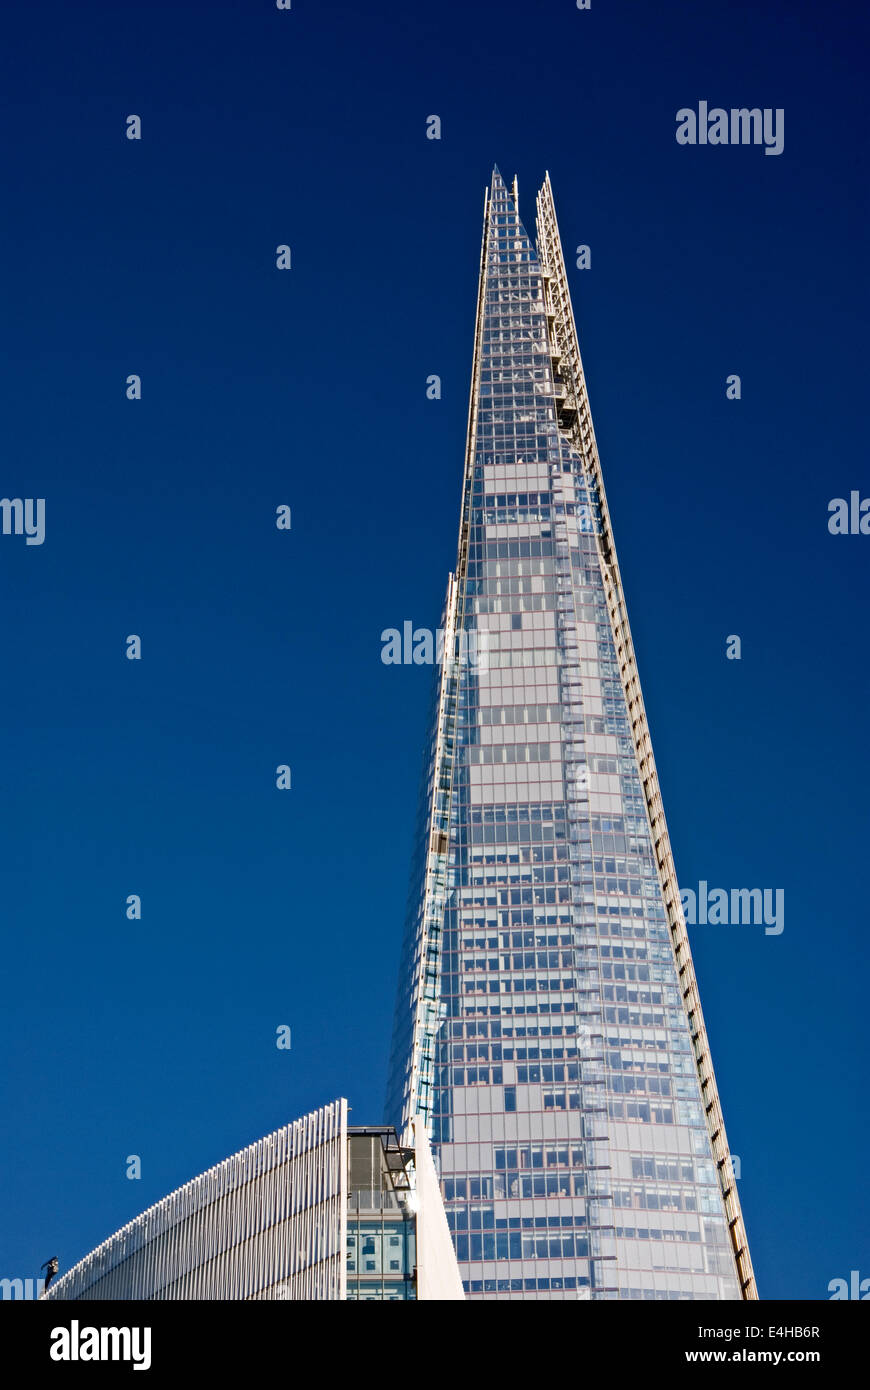 The Shard, the tallest skyscraper in Europe stands high above the South Bank of the River Thames in central London Stock Photo